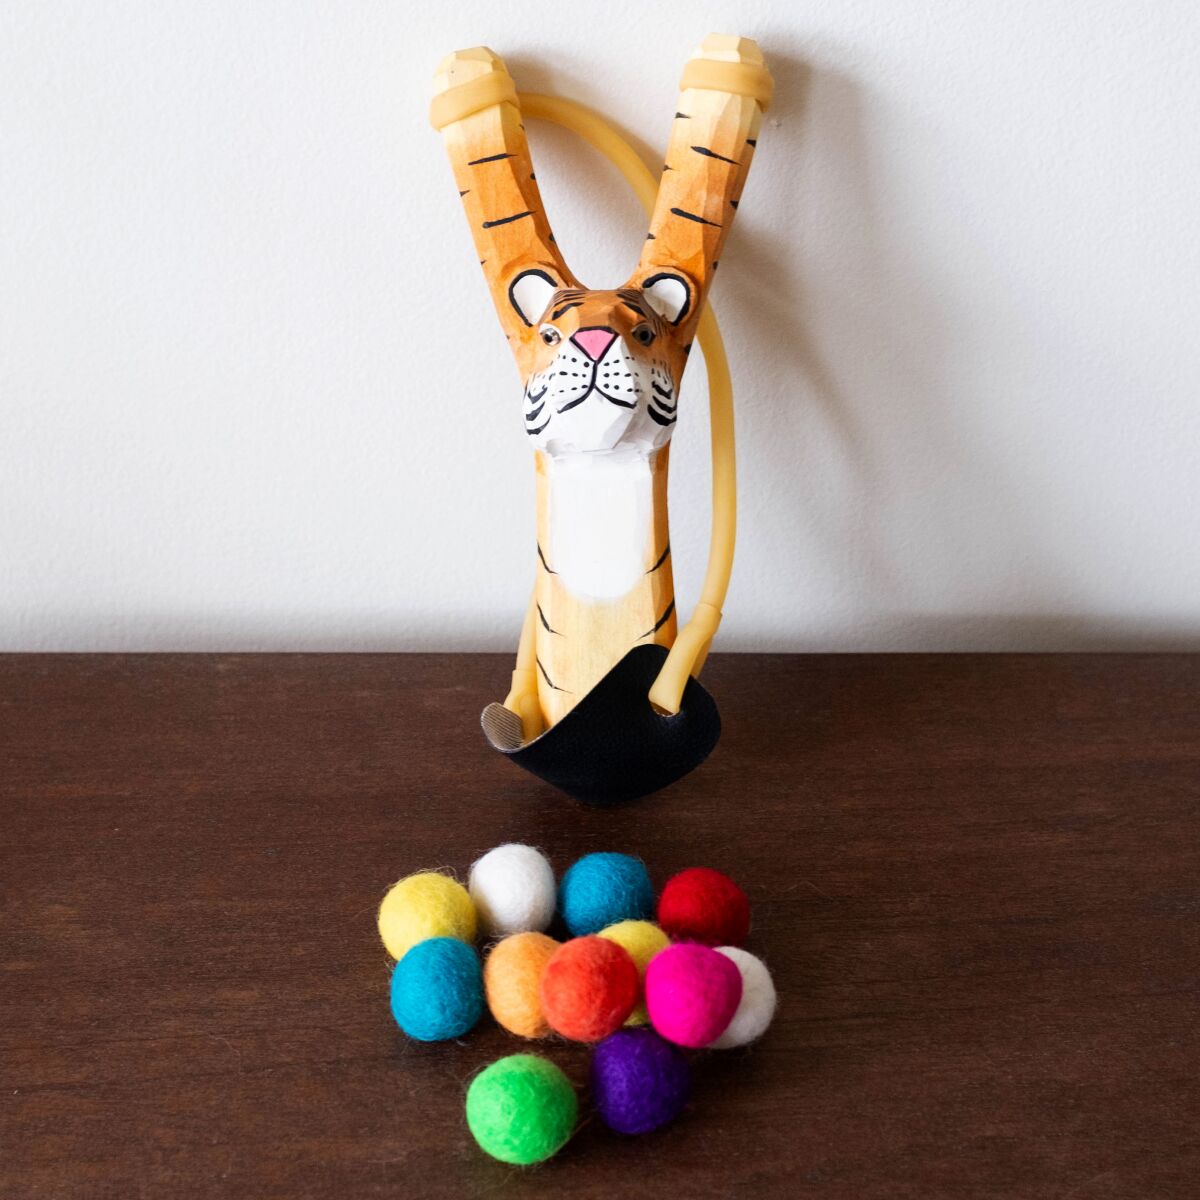 A slingshot shaped like a tiger with outstretched paws and 12 felt balls